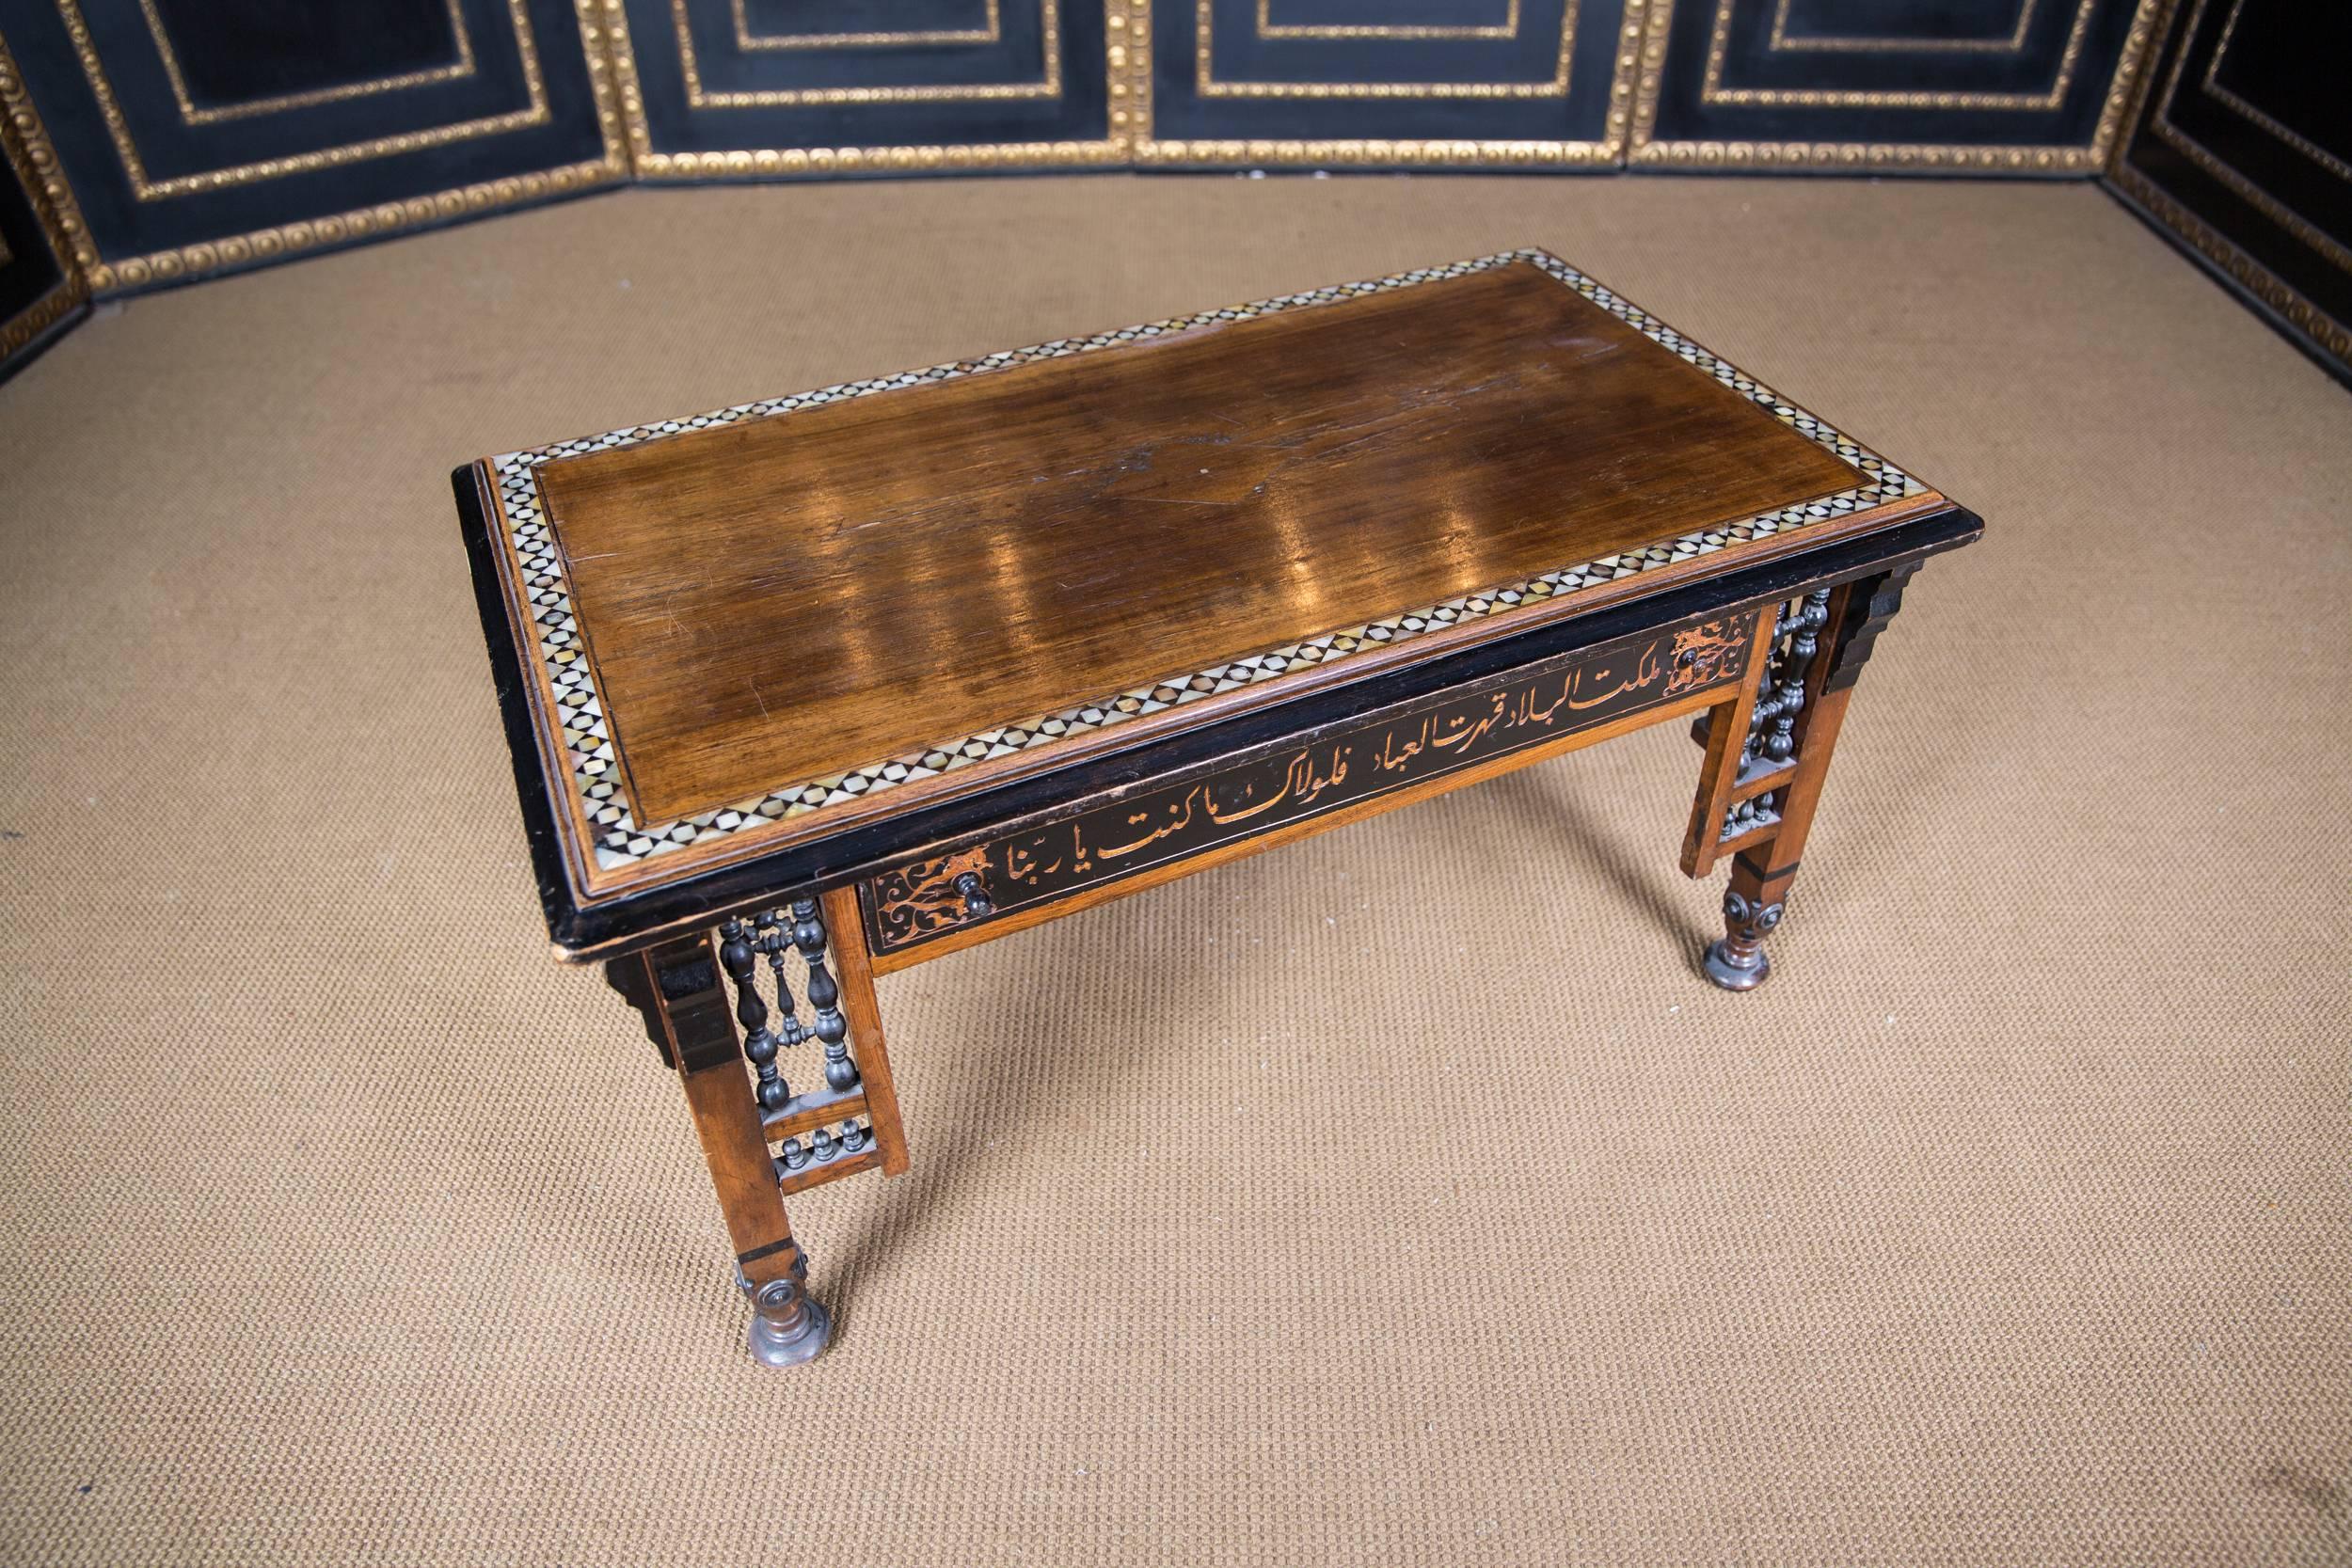 Islamic 19th Century, Oriental Couch Table with Inlaid Marakesch, circa 1900